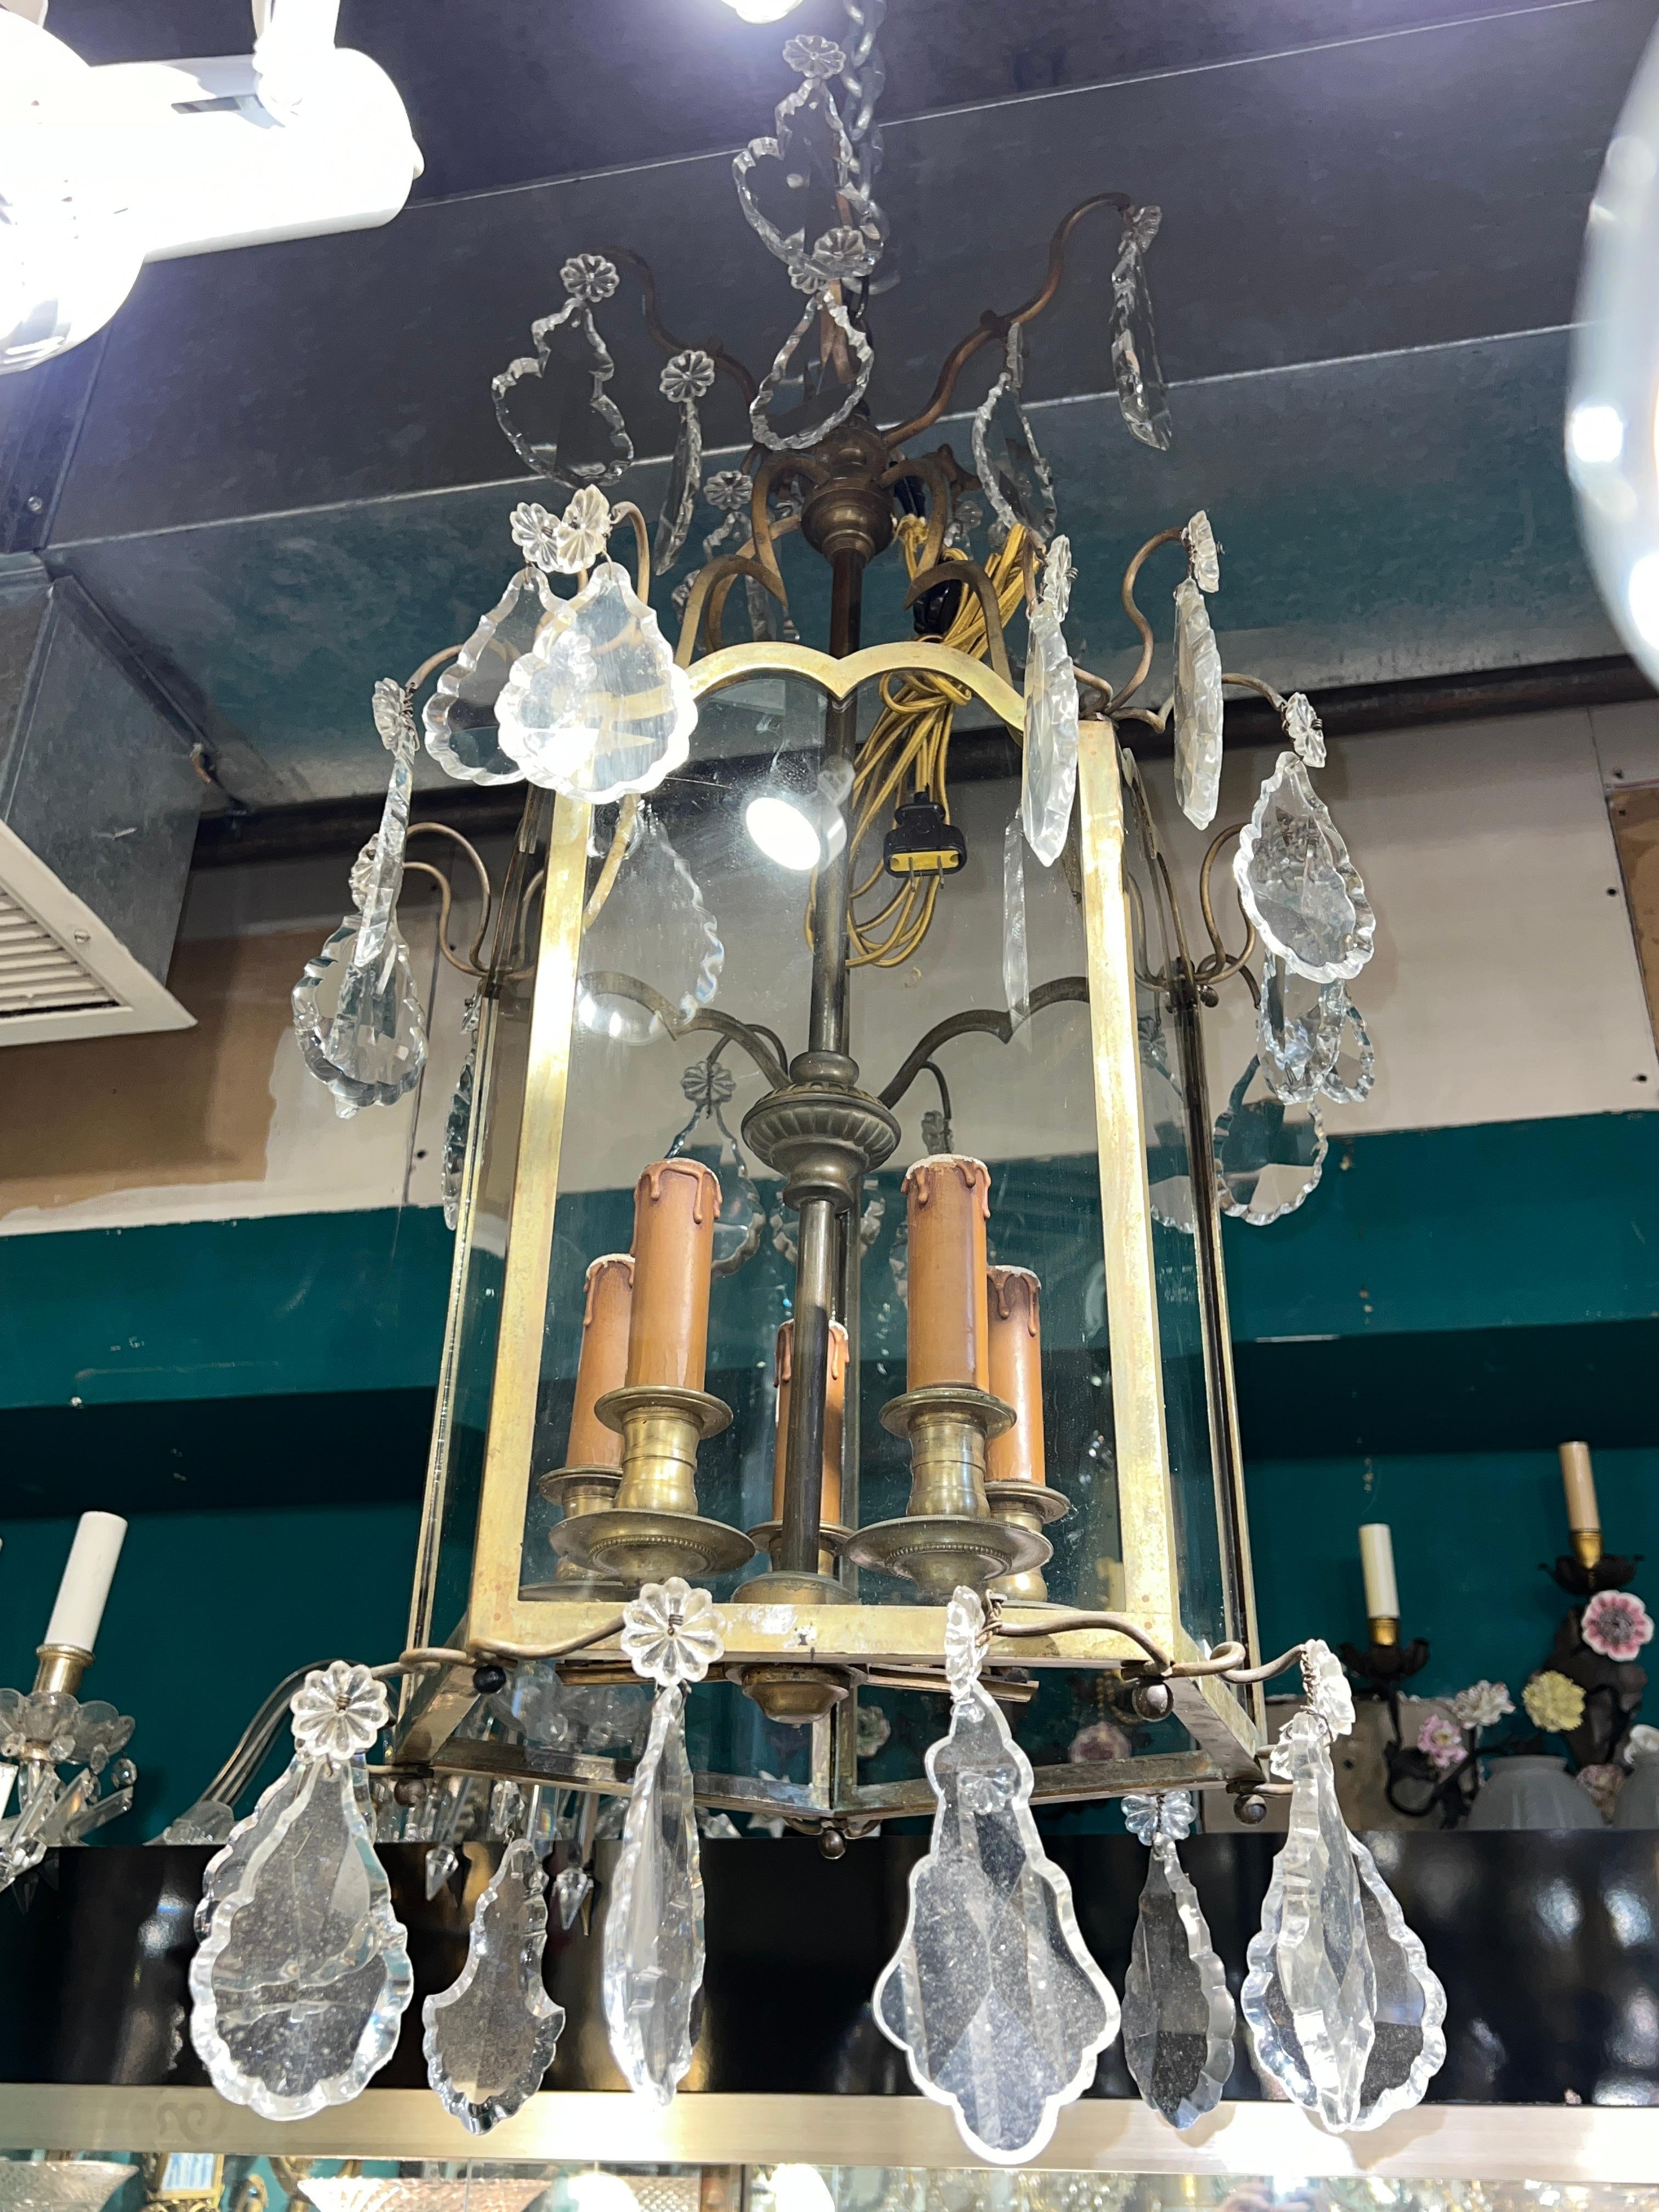 Large, antique lantern with faceted crystal pendants and four electrified candles with faux wax covers dating from the late 19th to early 20th century, with modern wiring and plug, ready for use.